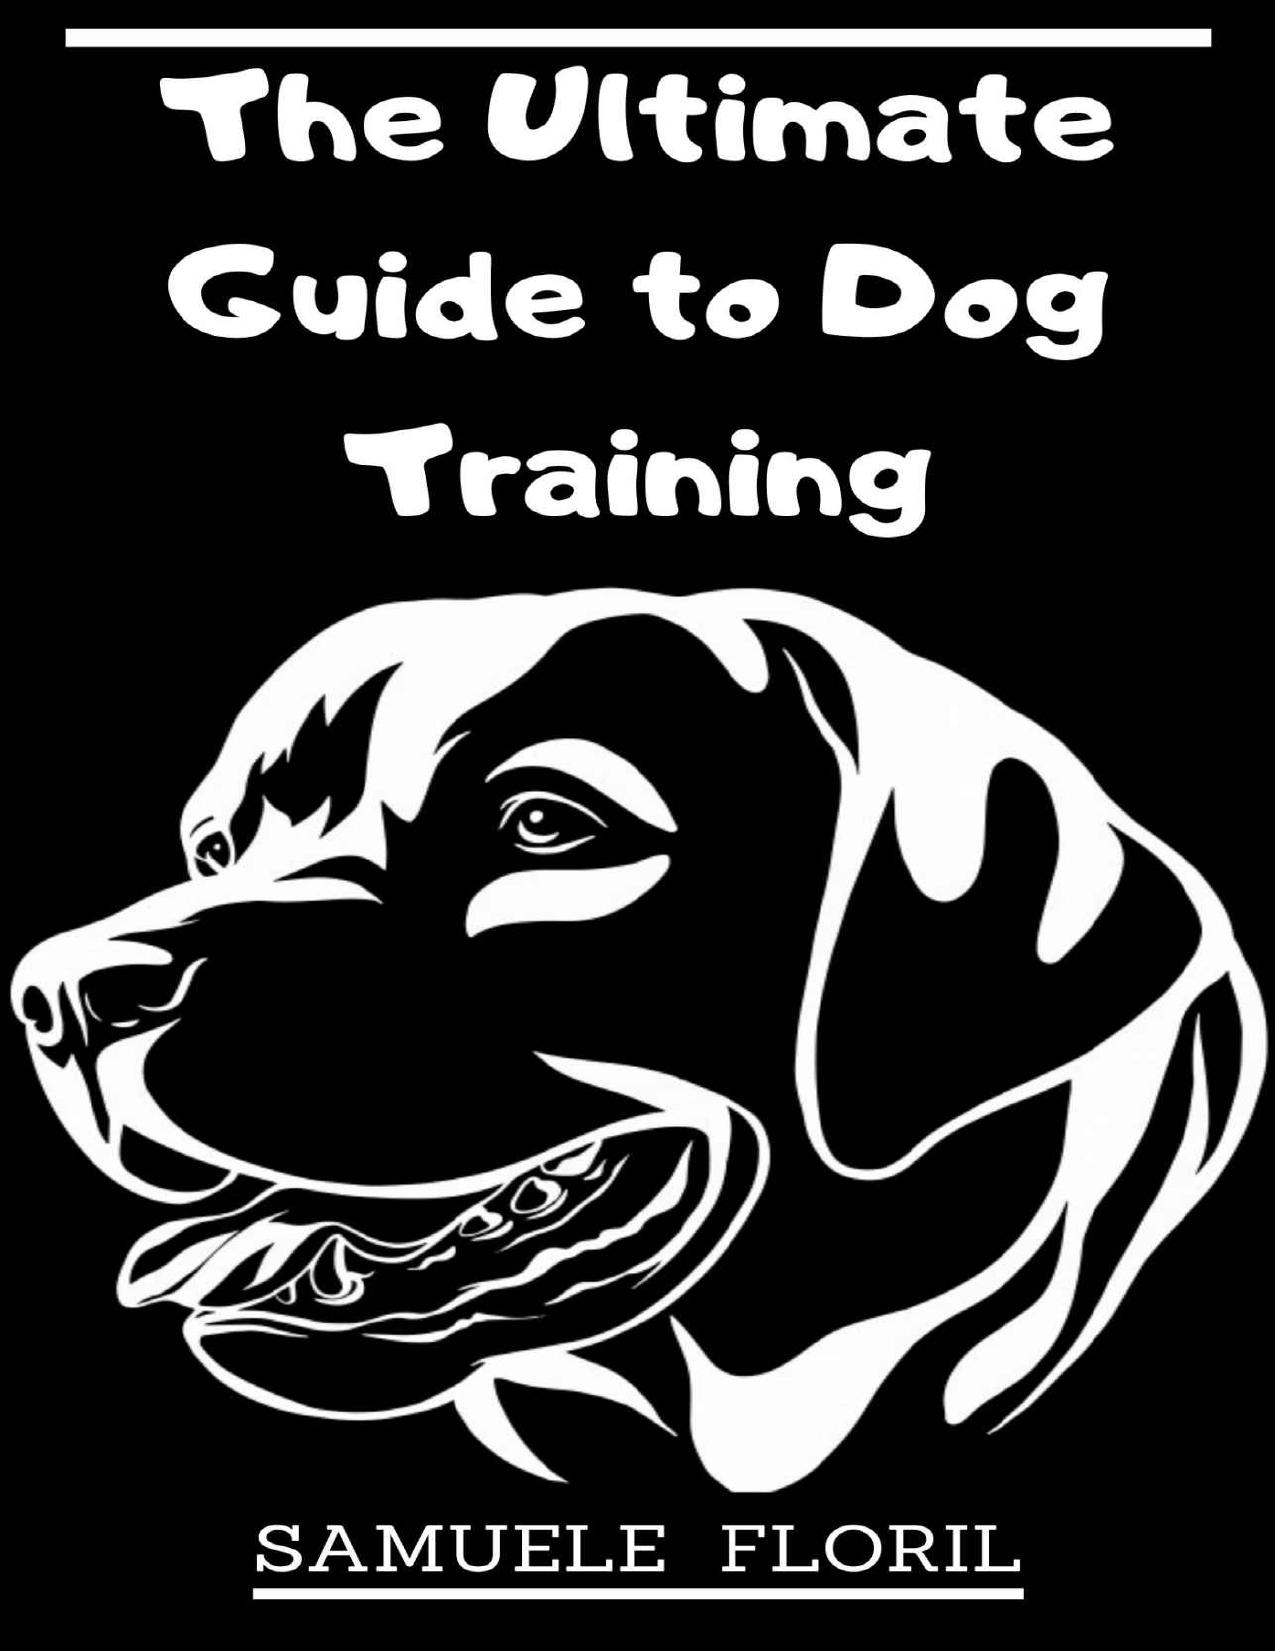 The Ultimate Guide to Dog Training: Beginner's Guide to Dog Training by Samuele Floril